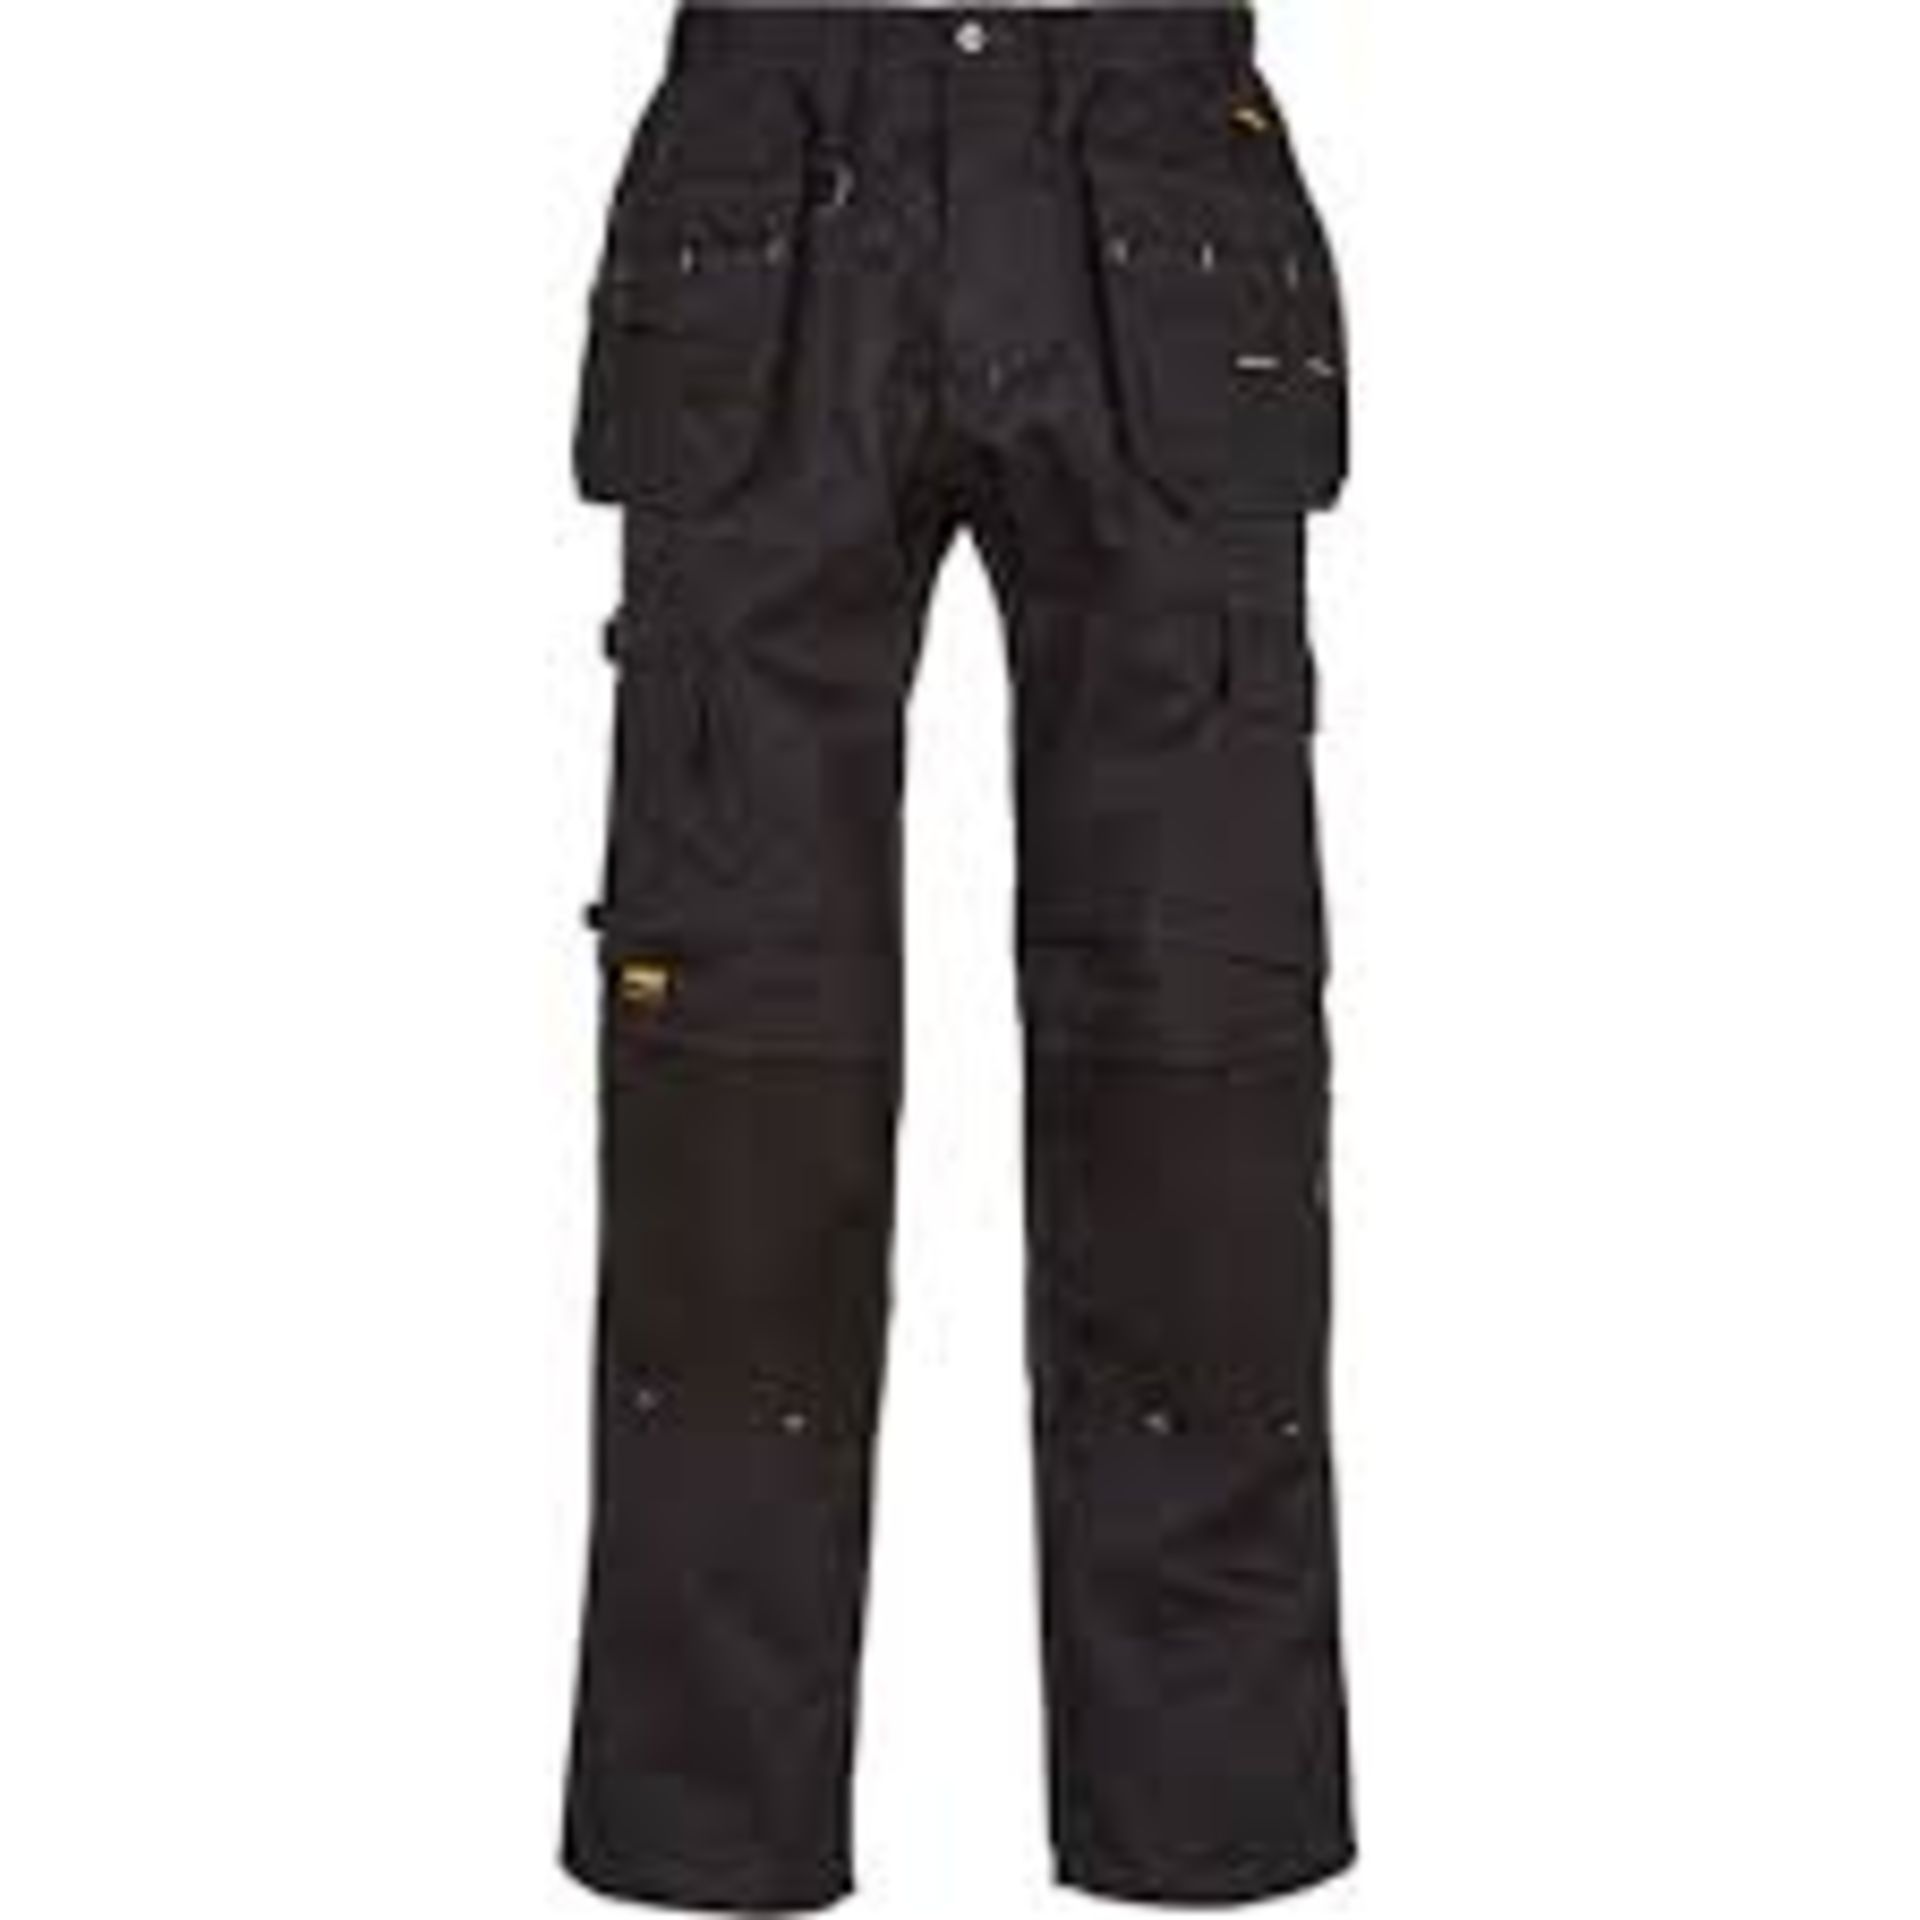 3 x NEW PACKAGED PAIRS OF DEWALT PRO TRADESMAN WORK TROUSERS. (ROW3)